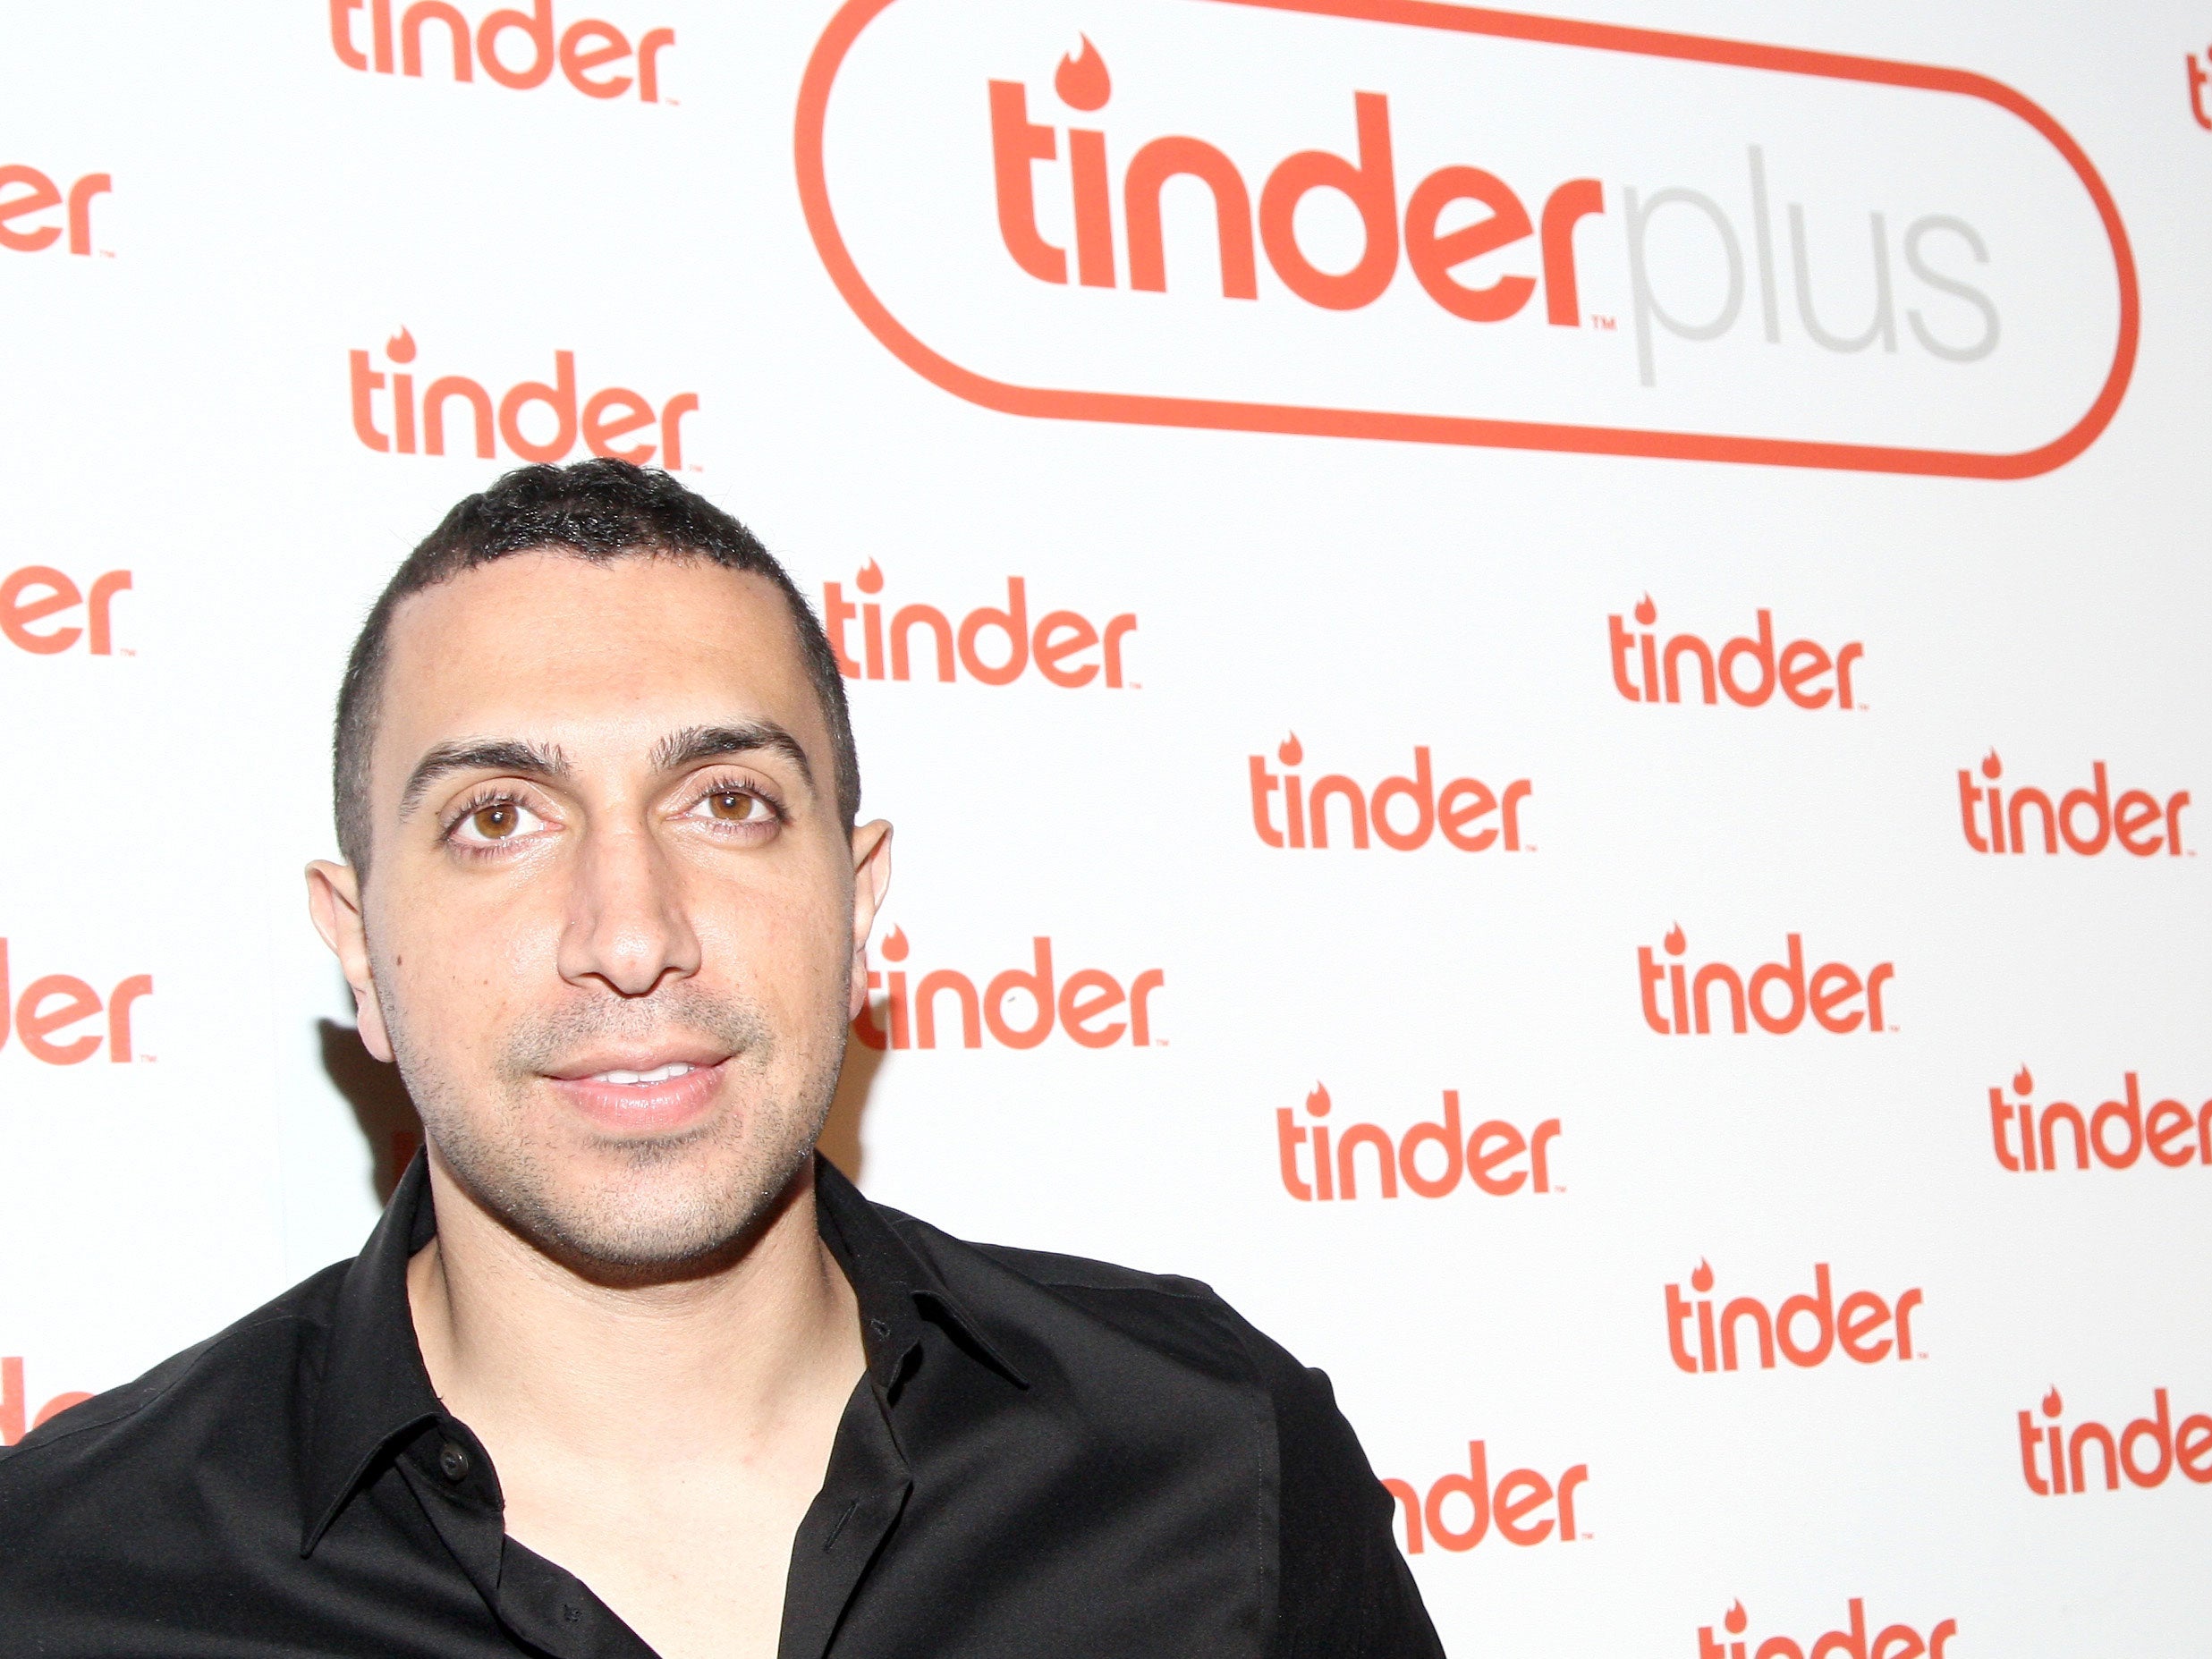 Tinder co-founder Sean Rad at the launch of Tinder Plus, the company's premium paid service